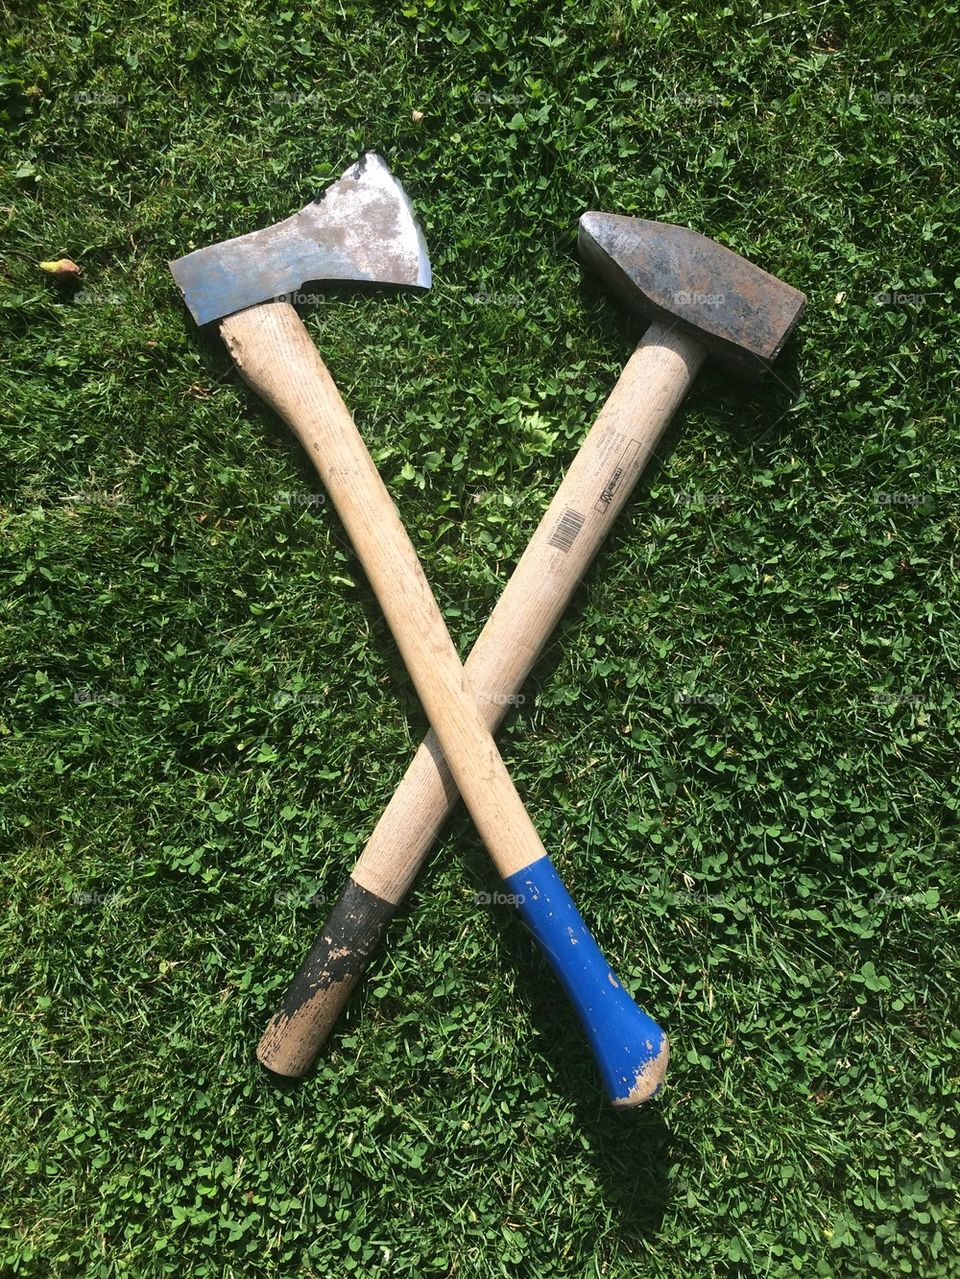 Hammer and axe